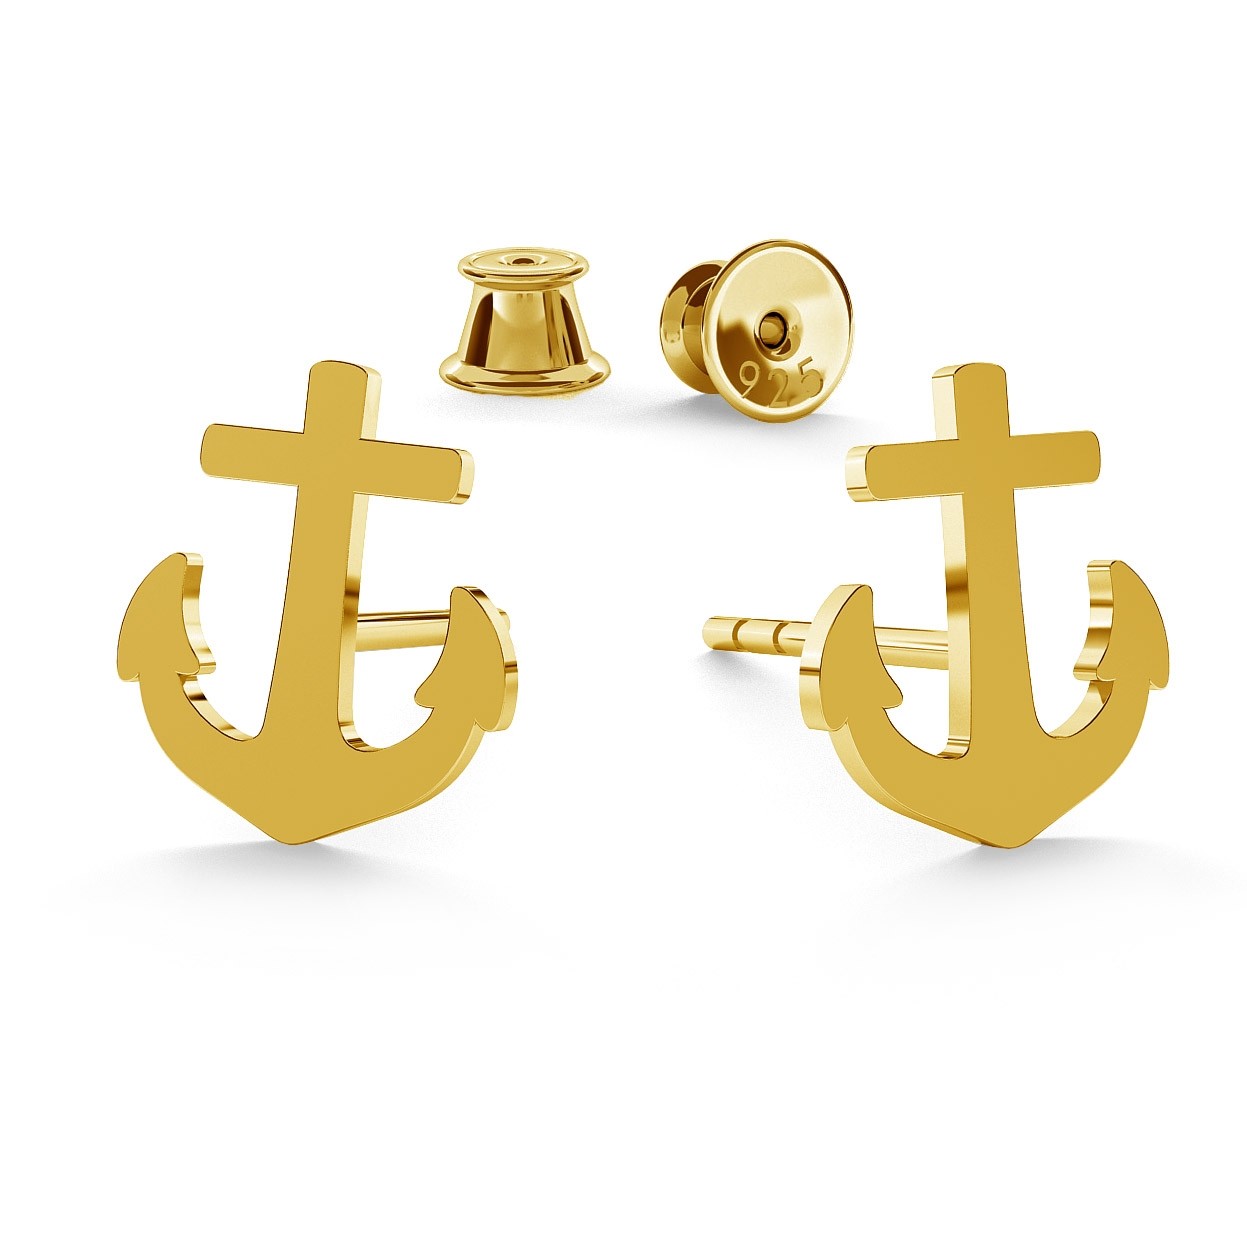 EARRINGS ANCHORS, STERLING SILVER (925) RHODIUM OR GOLD PLATED